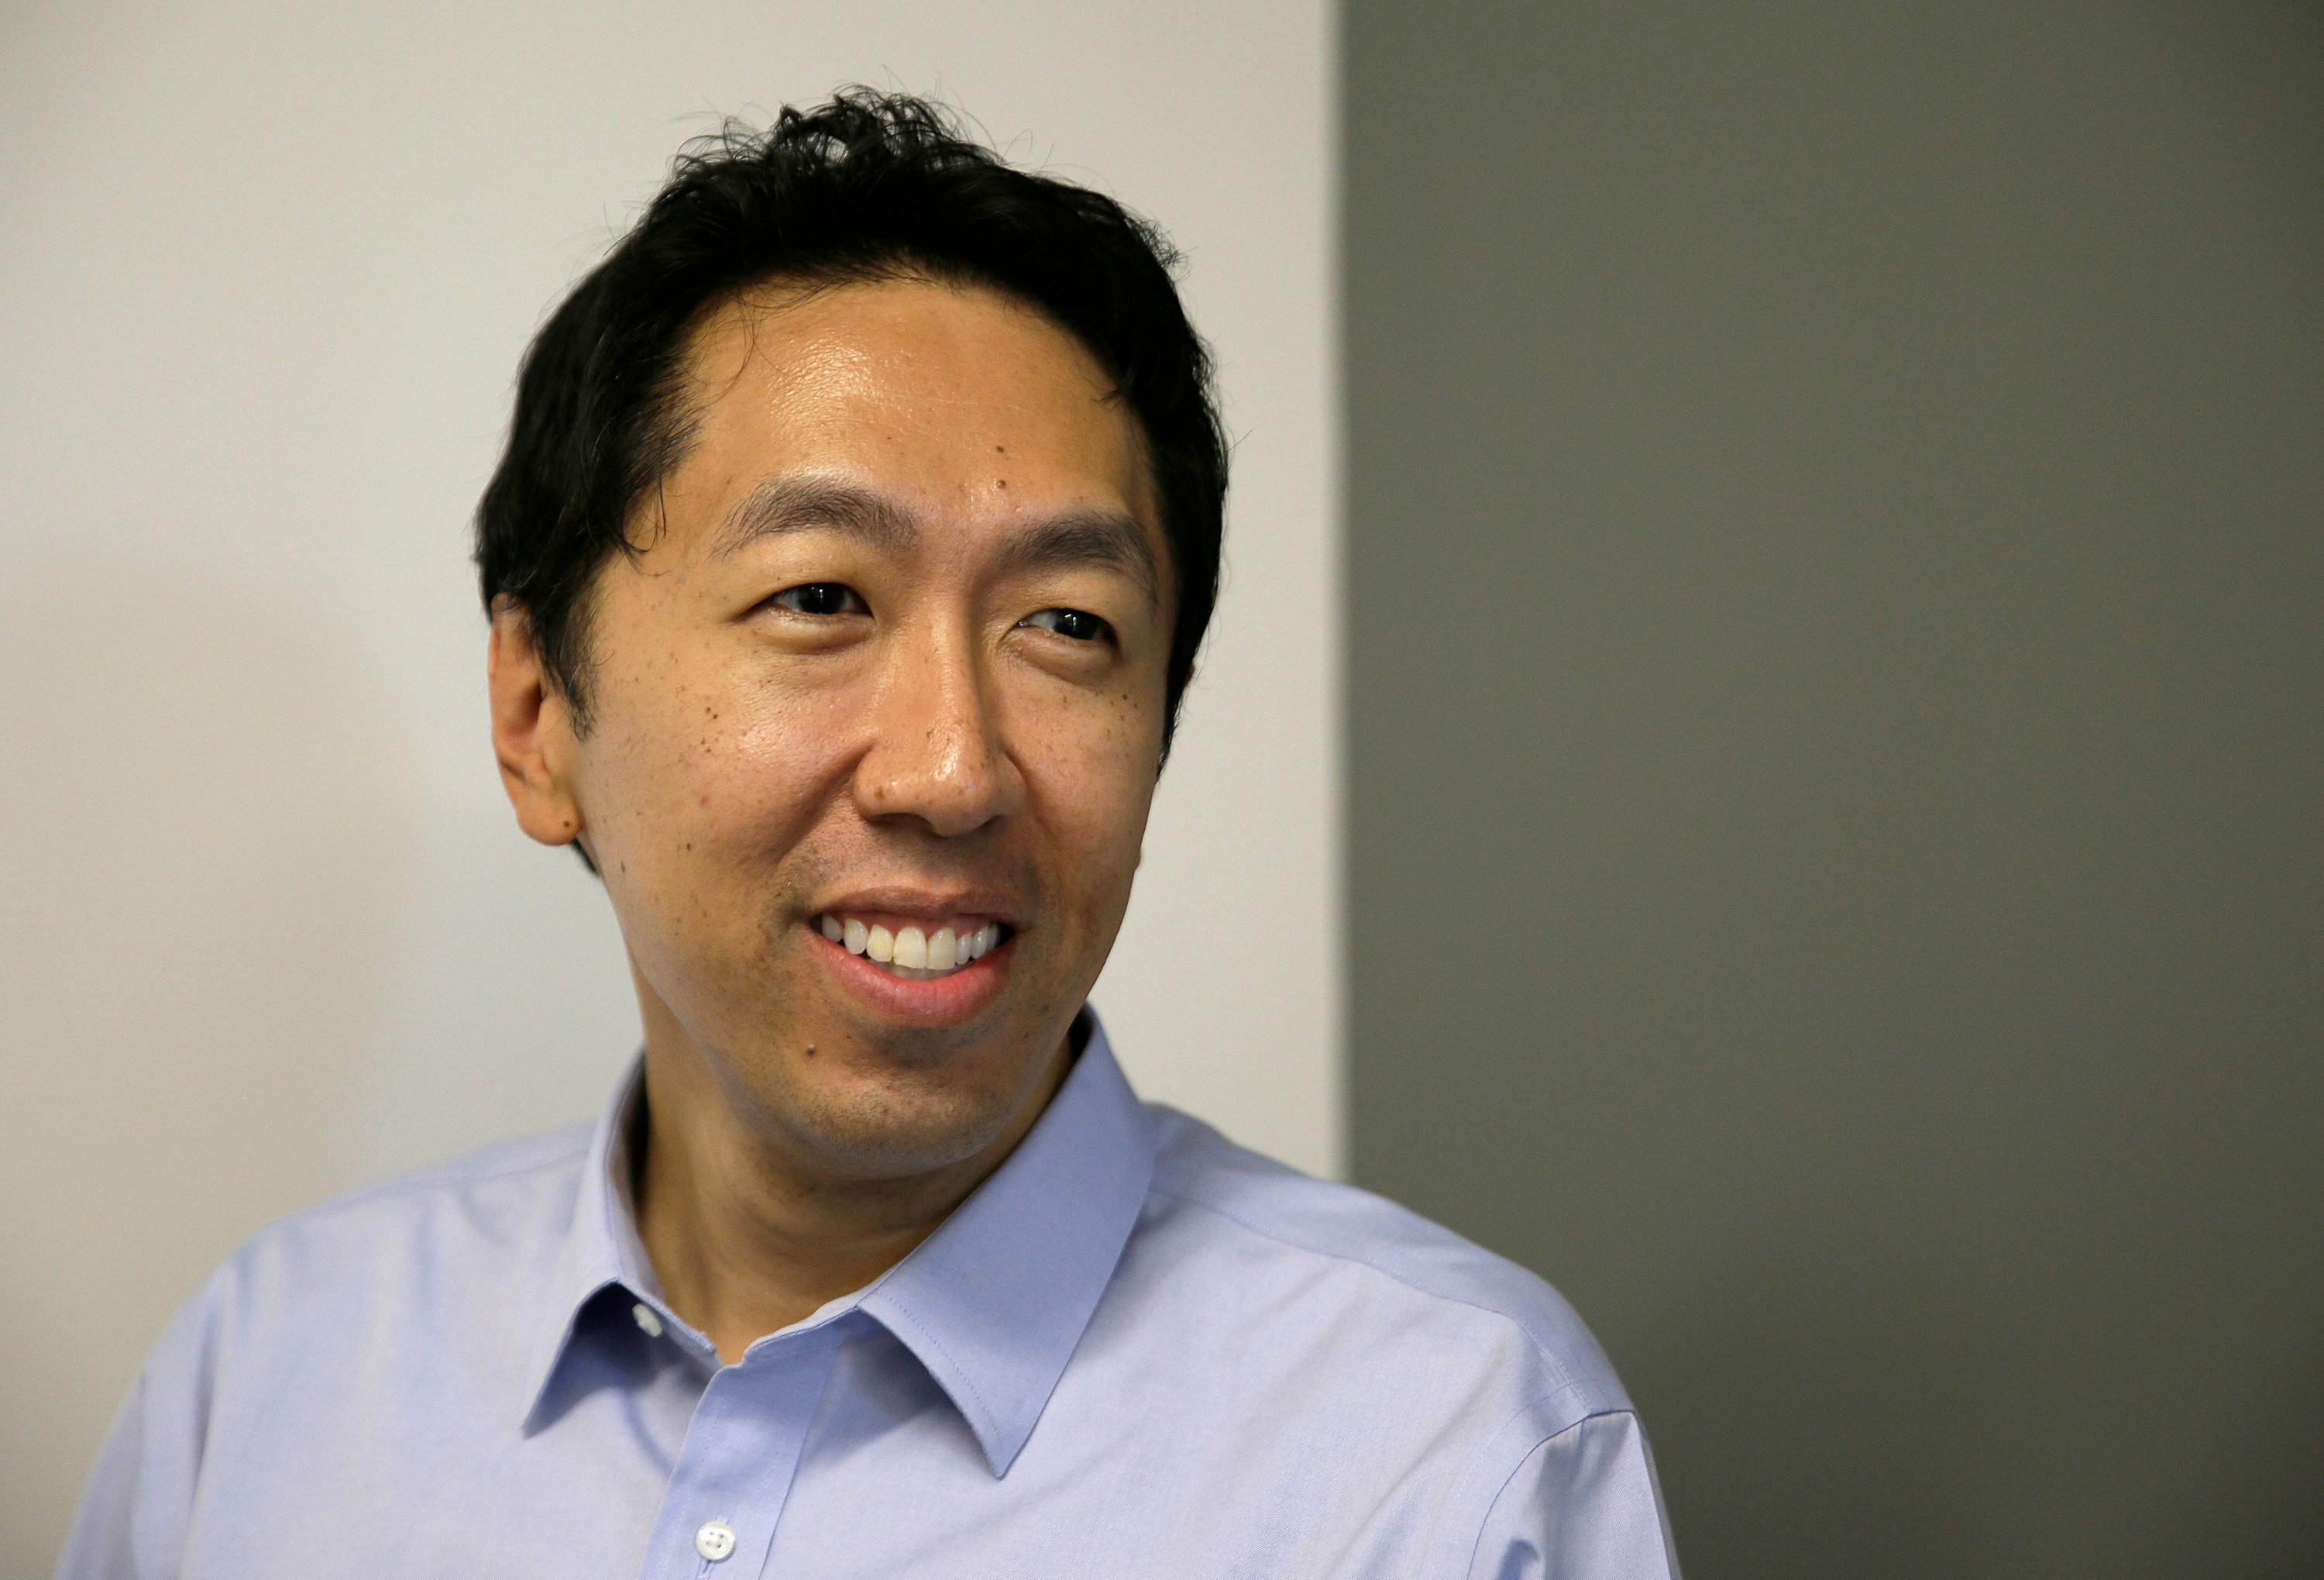 Andrew Ng, leading AI expert who worked at Baidu, has been appointed to Amazon’s board of directors. Photo: AP Photo